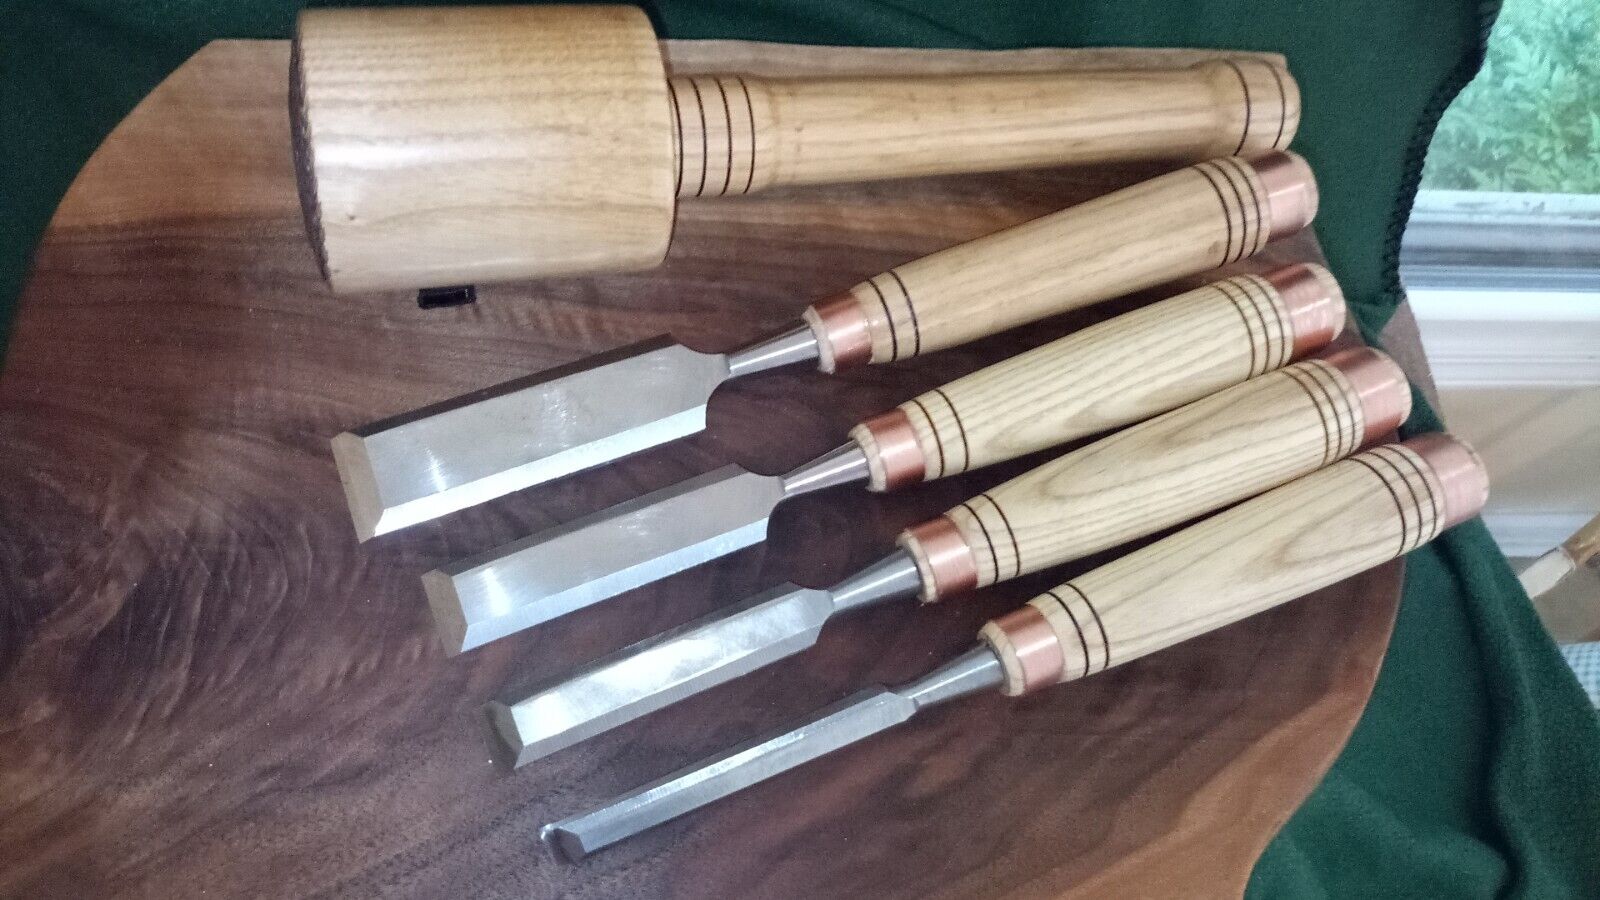 Set of 4 Timber Frame Wood Chisels and Maple Woodworkers Mallet.